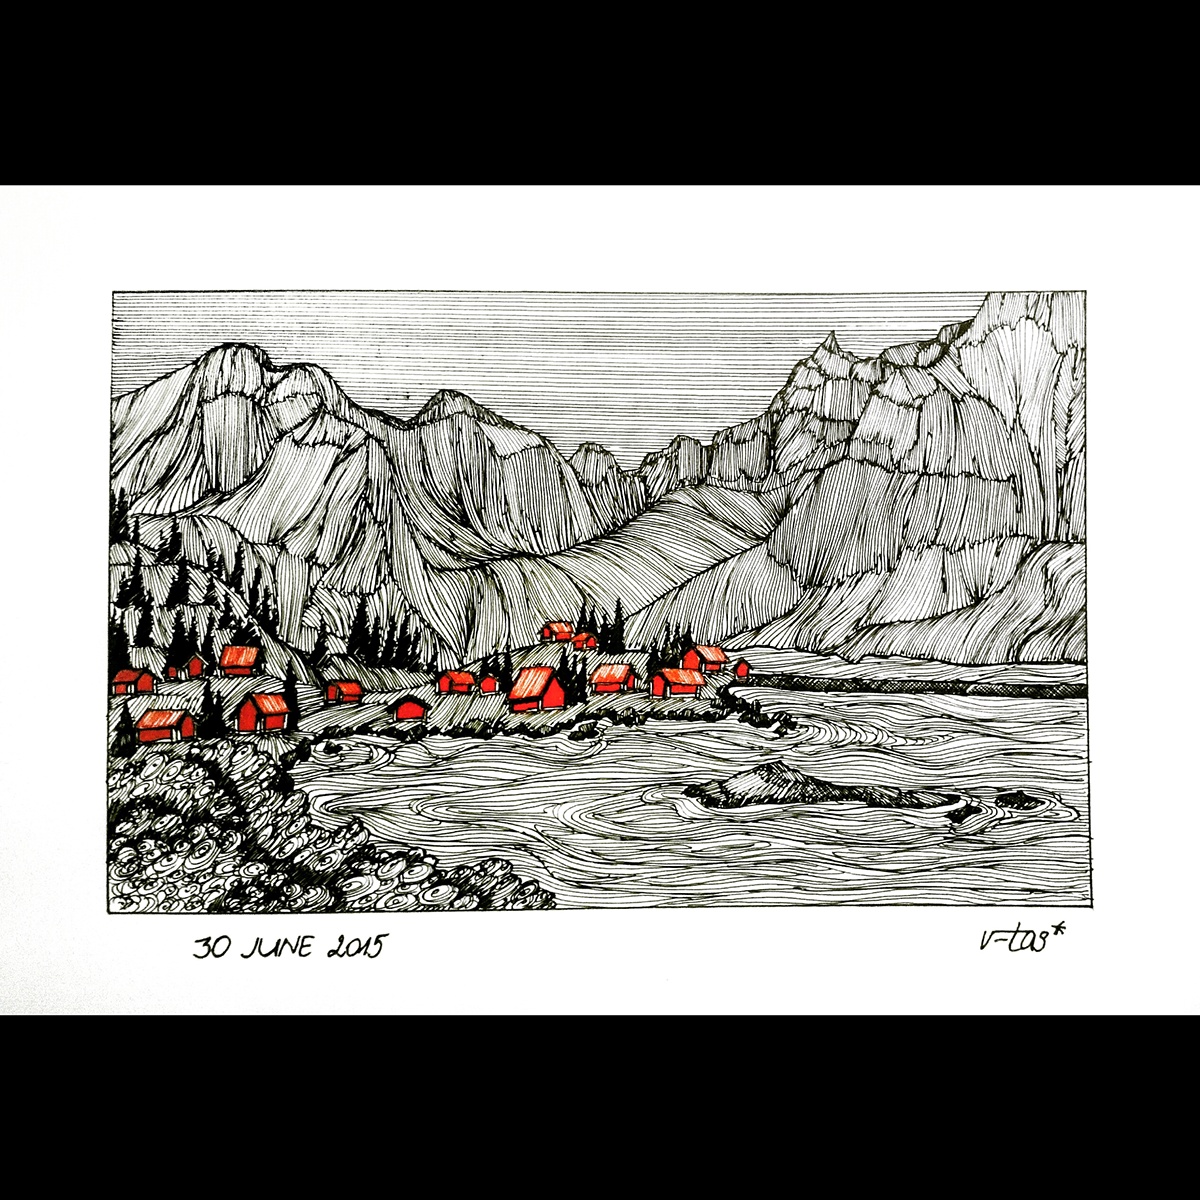 hatching fine lines lines graphics challenge drawing challenge a drawing a Day daily drawing free hand Nature people mountains creative Original